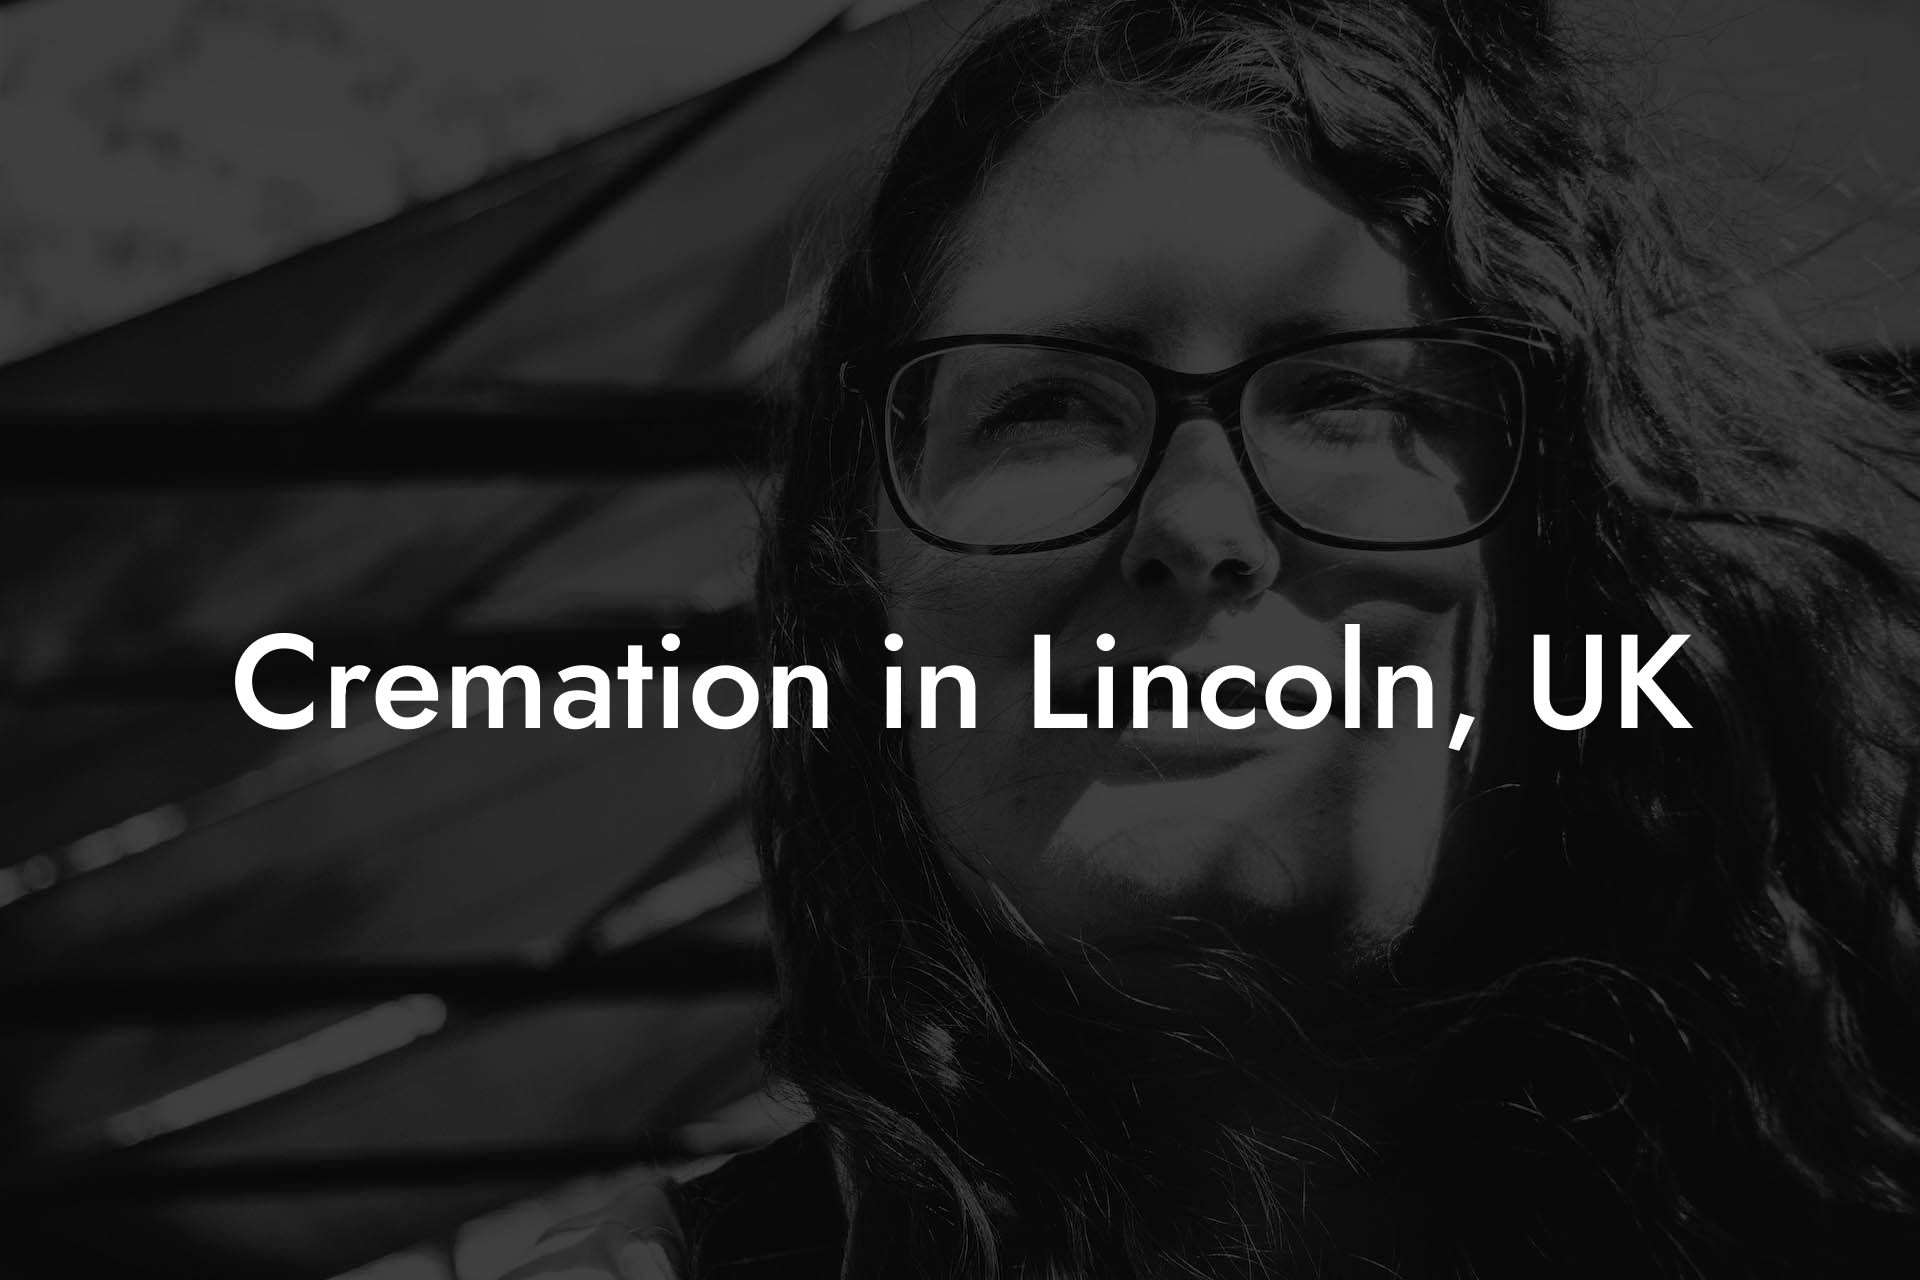 Cremation in Lincoln, UK